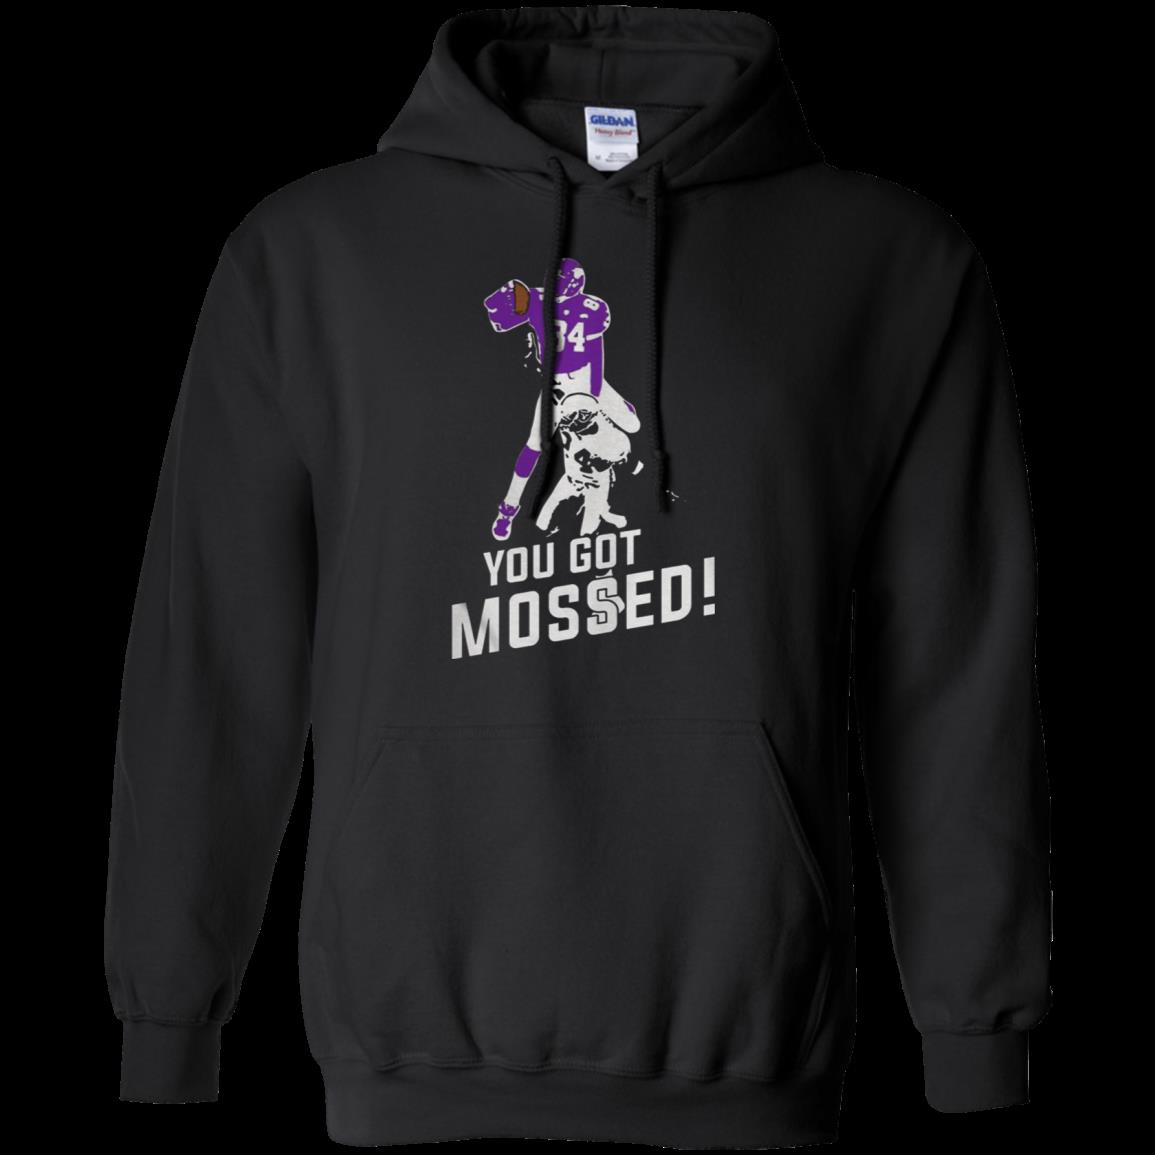 Randy Moss Over Charles Woodson You Got Mossed Hoodie – Moano Store